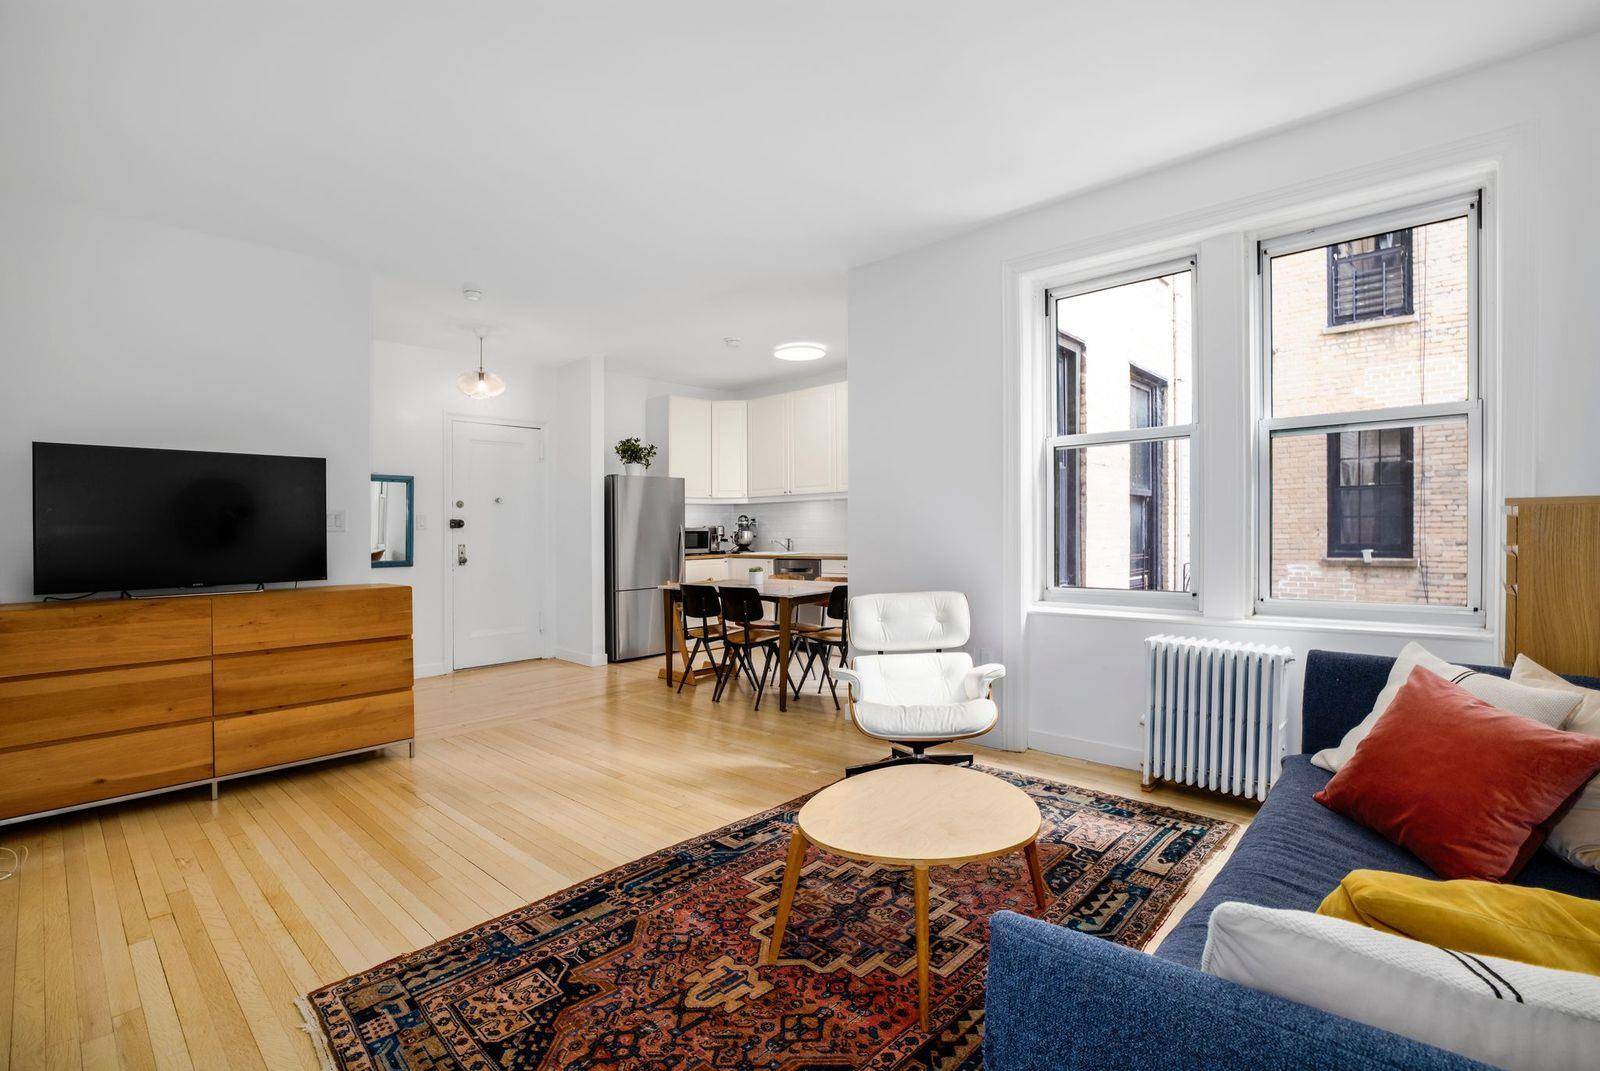 Wake up everyday facing a green oasis of trees in tranquil and serene Brooklyn Heights.